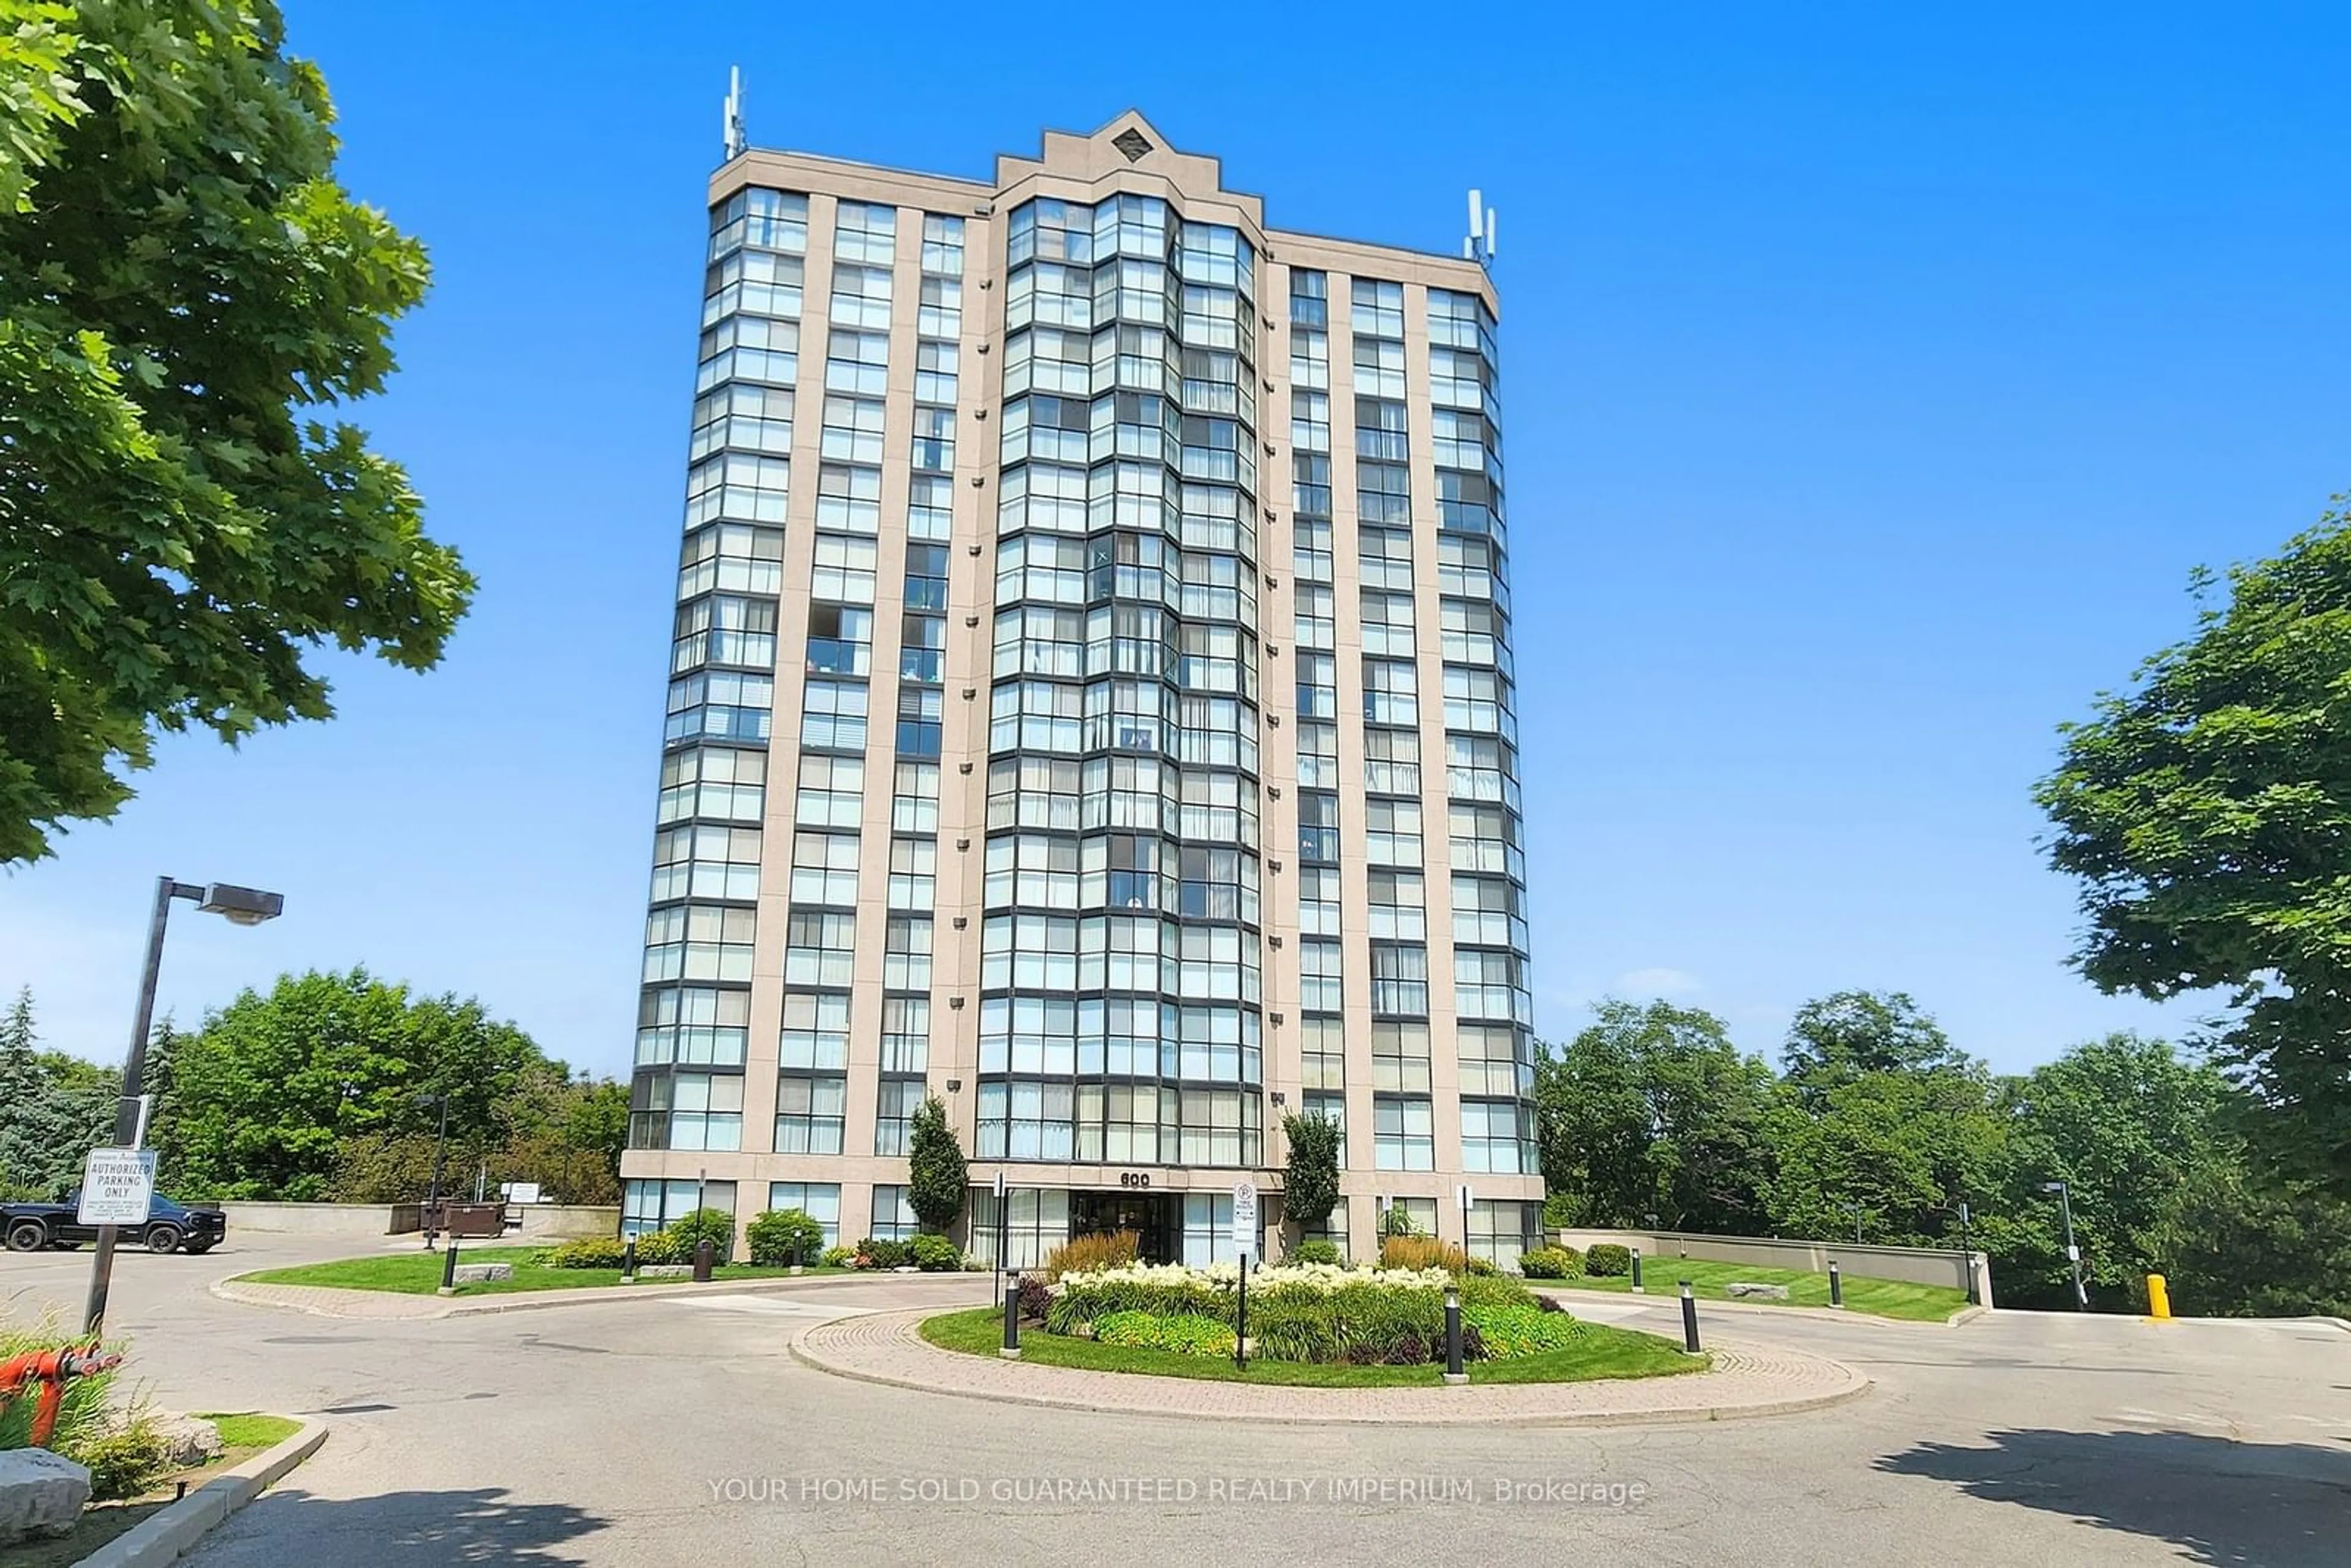 A pic from exterior of the house or condo for 600 Rexdale Blvd #503, Toronto Ontario M9W 6T4